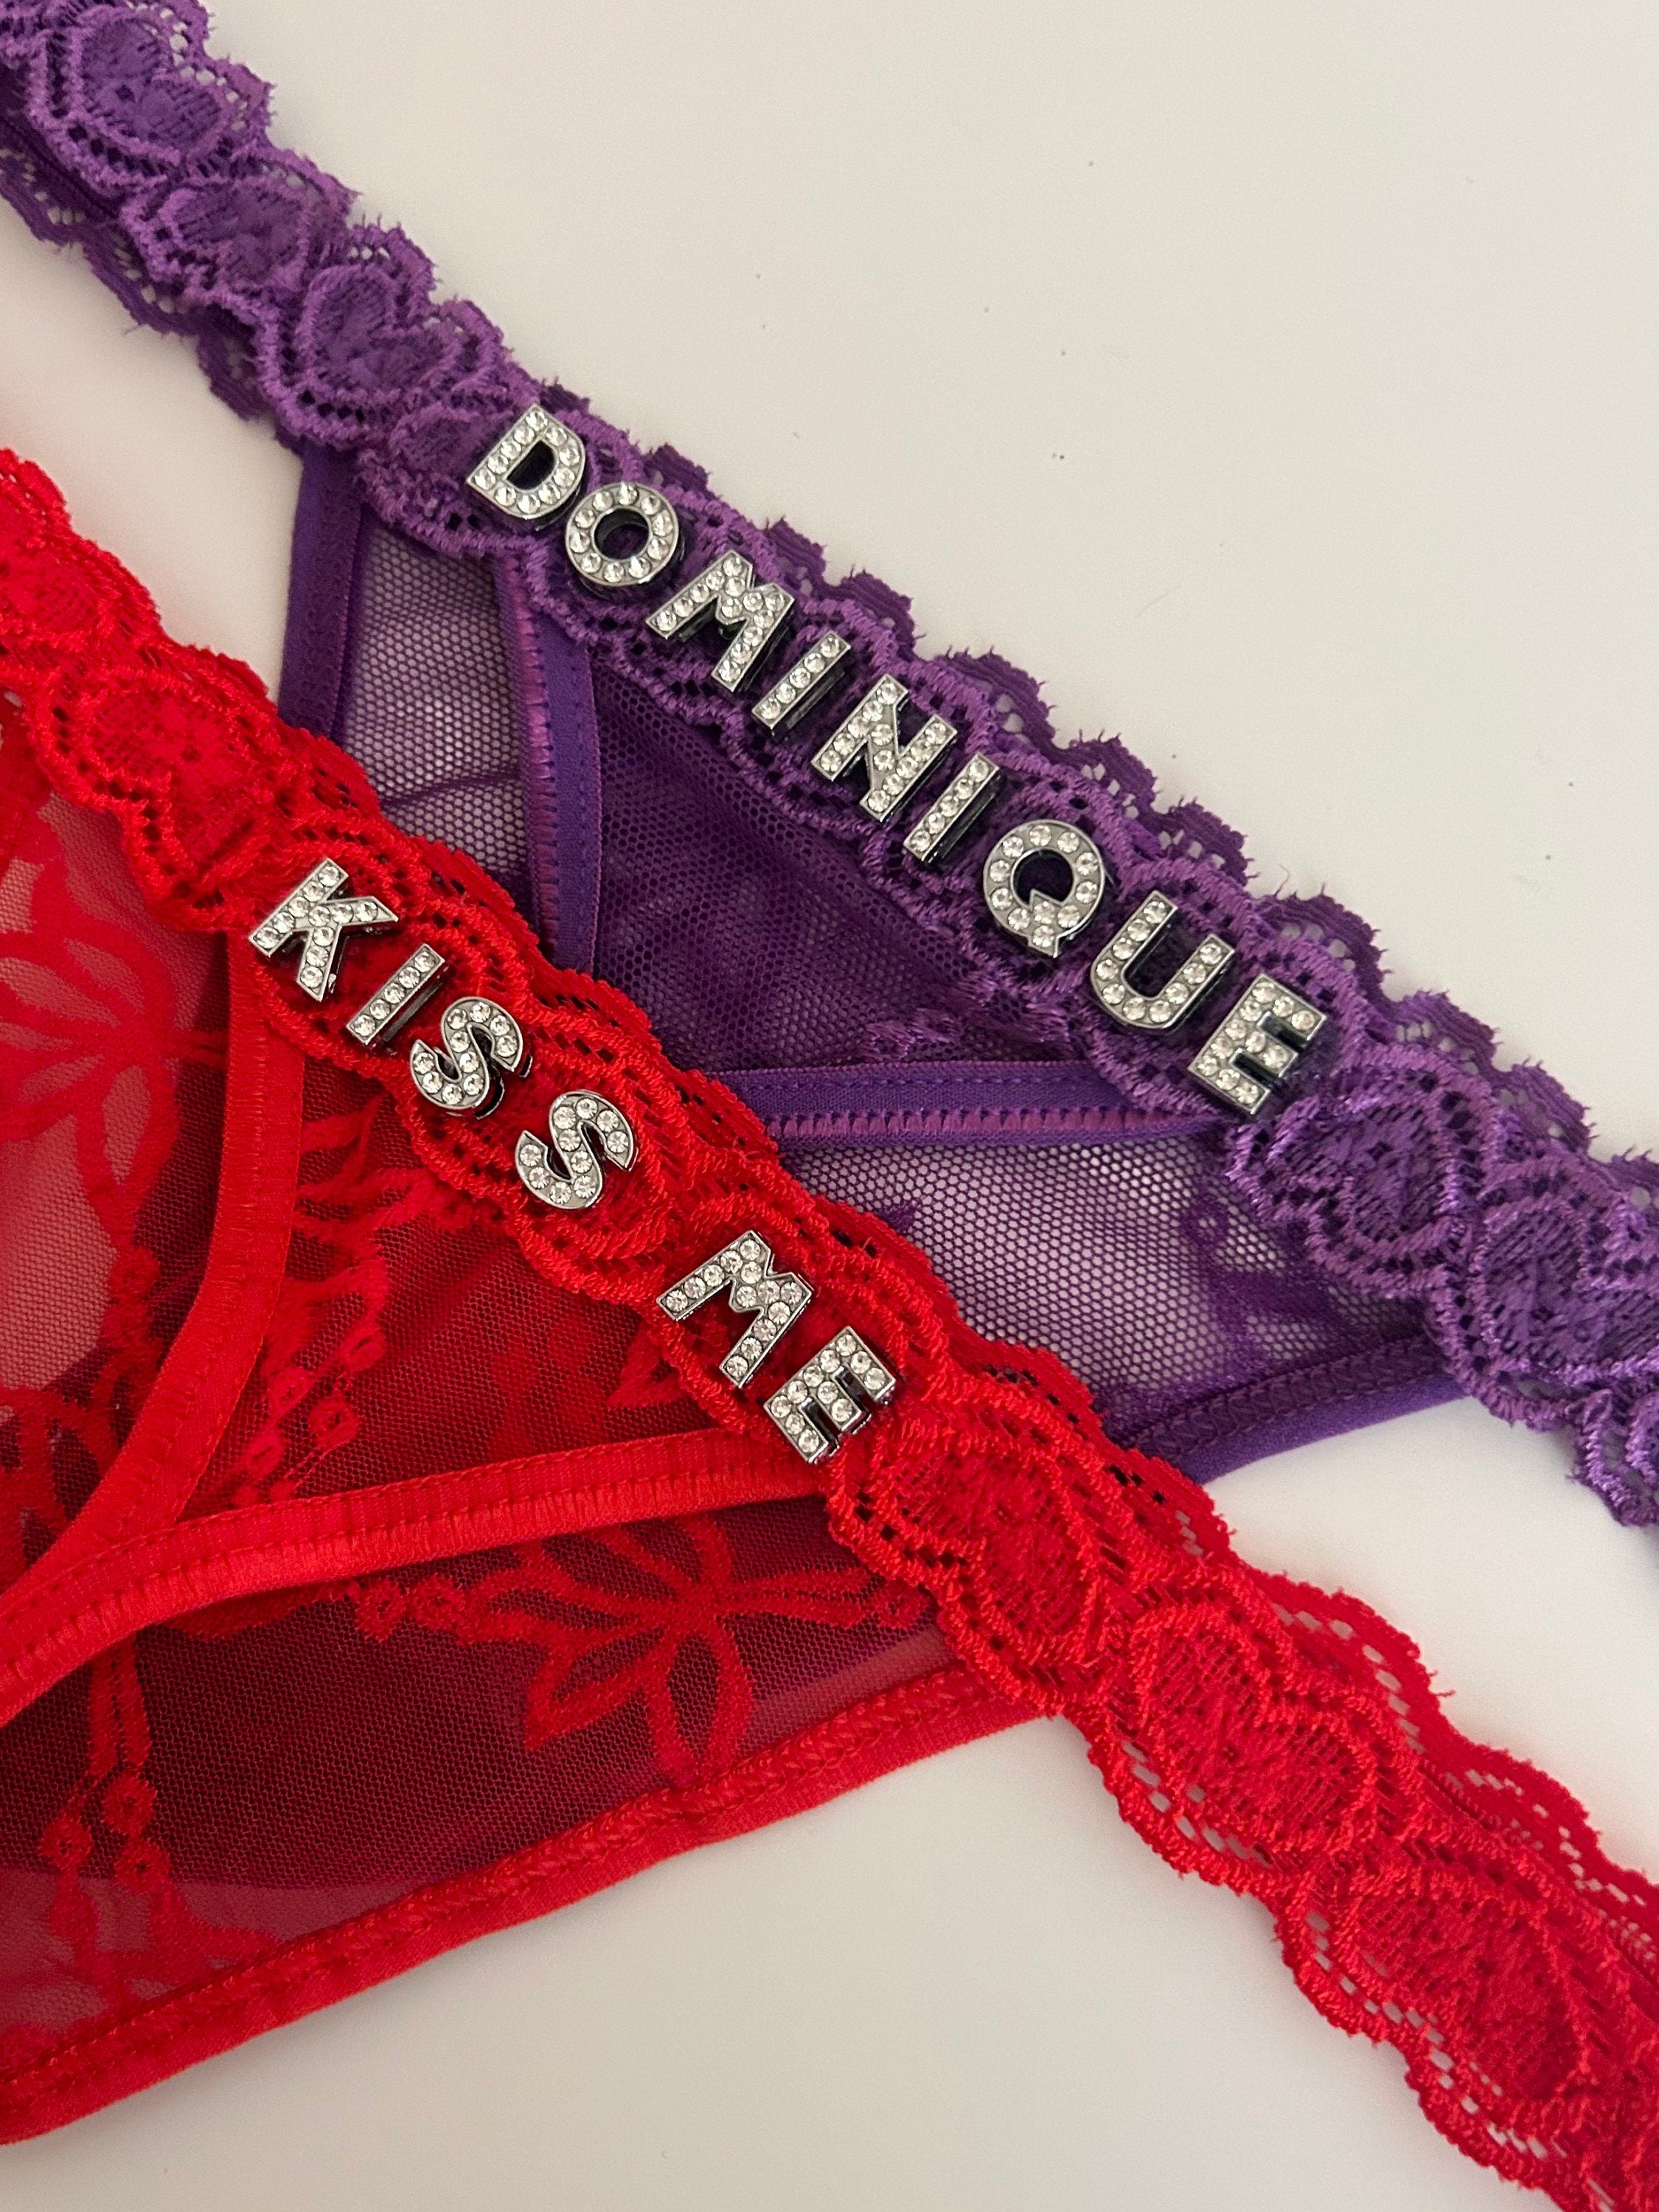 Personalized Name Thong: A Unique Surprise Gift